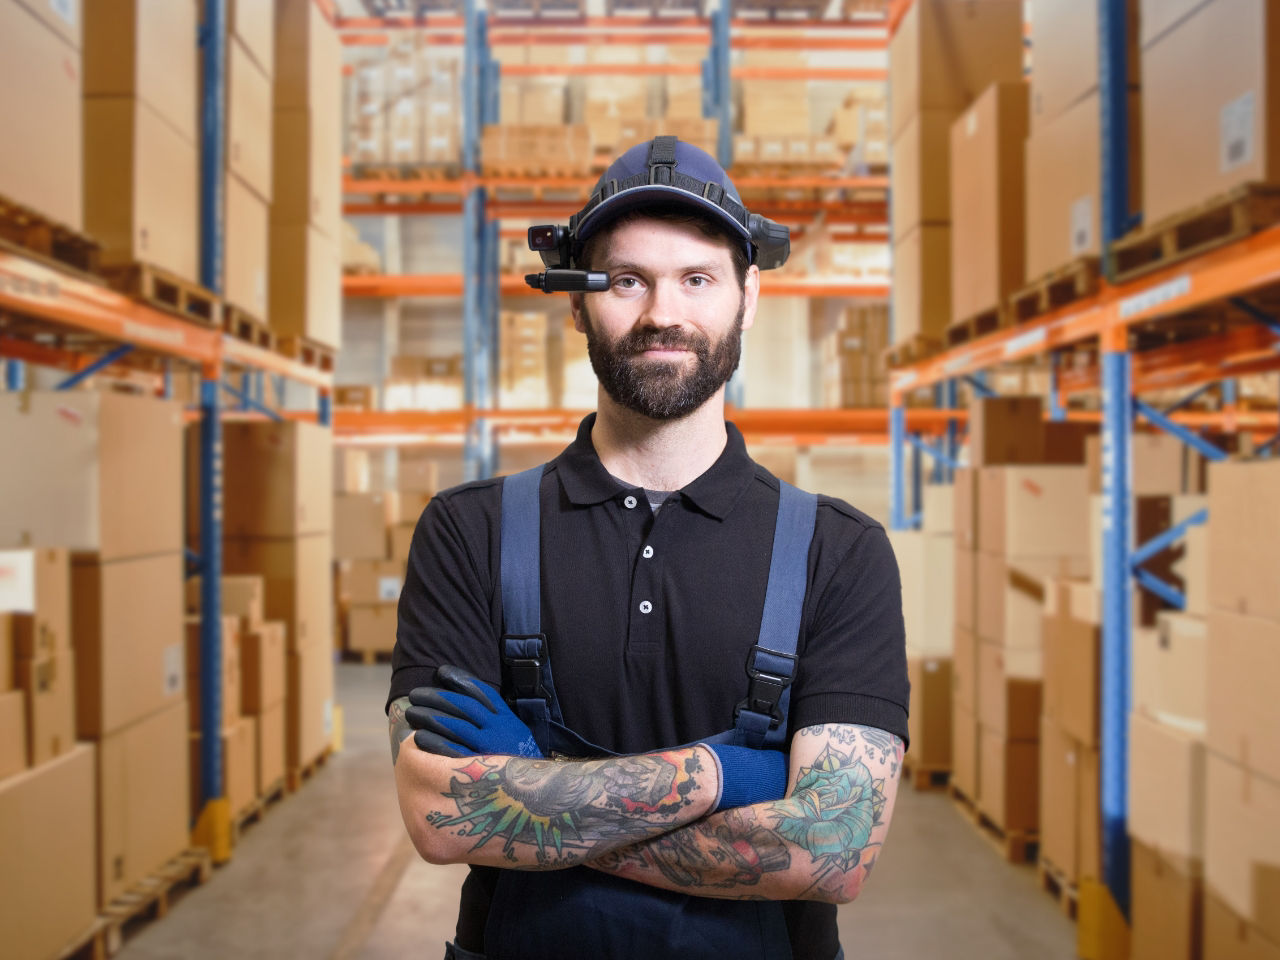 employee using vision picking in warehousing and logistics to optimize inventory